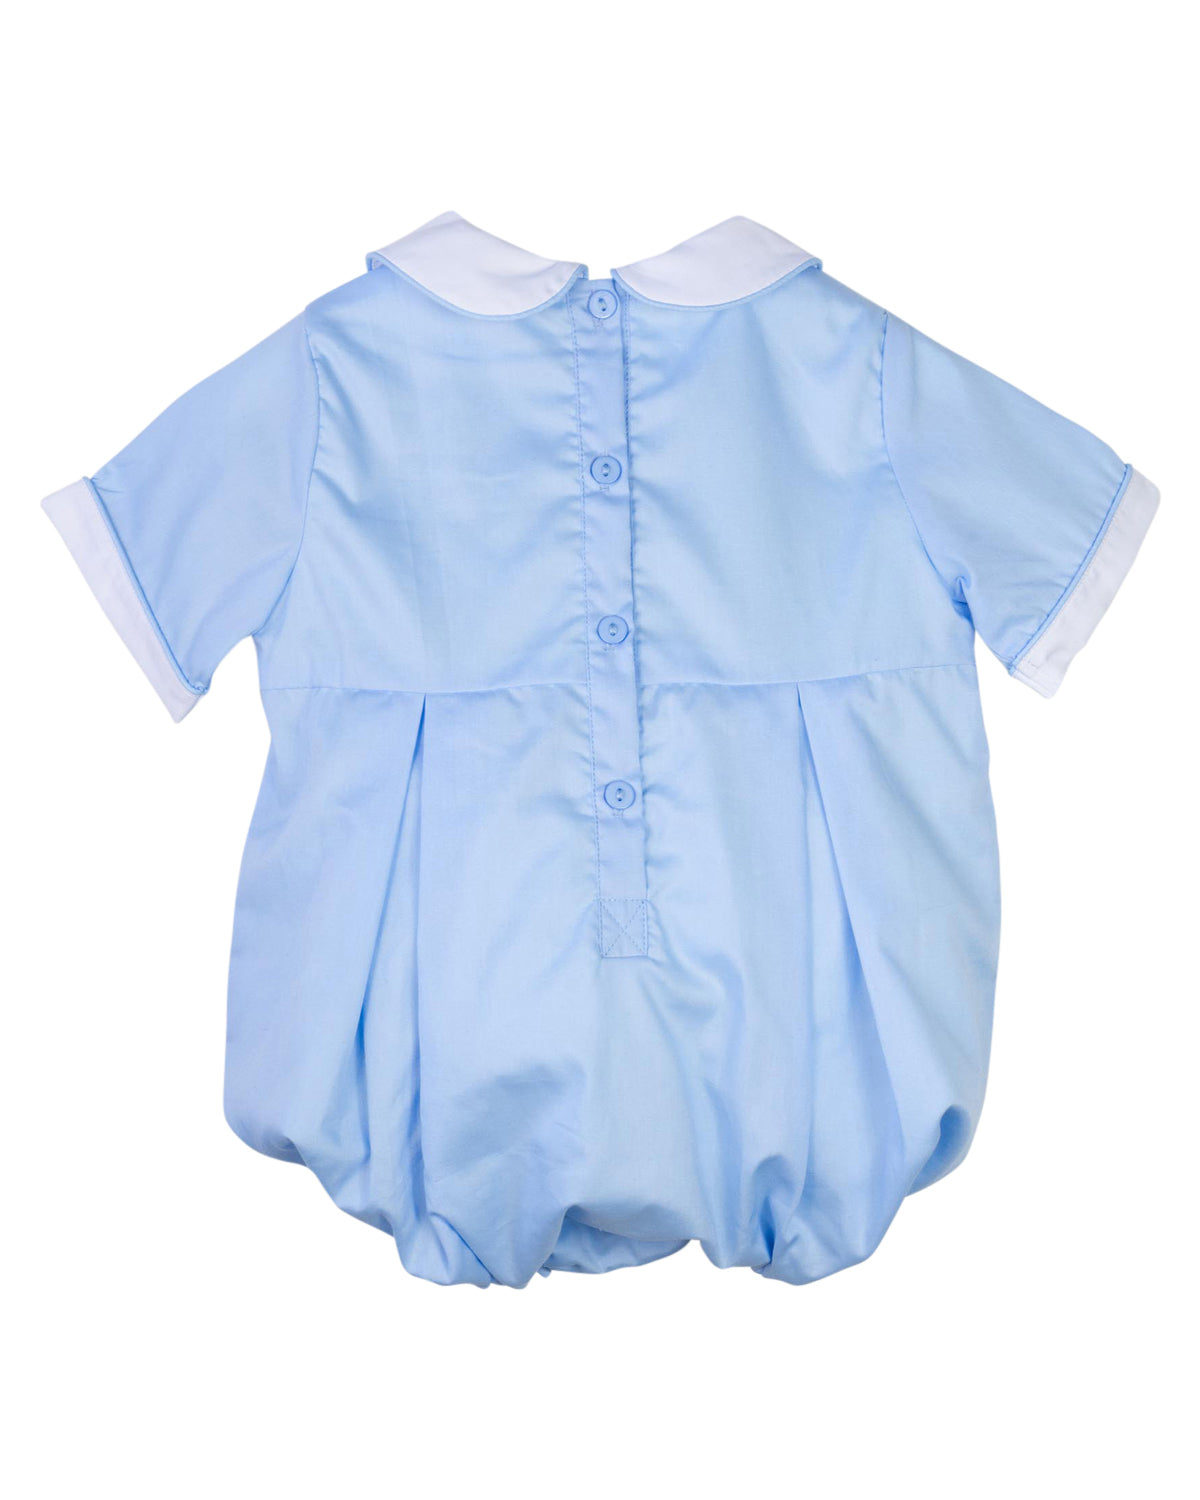 Whales Smocked Peter Pan Bubble-FINAL SALE